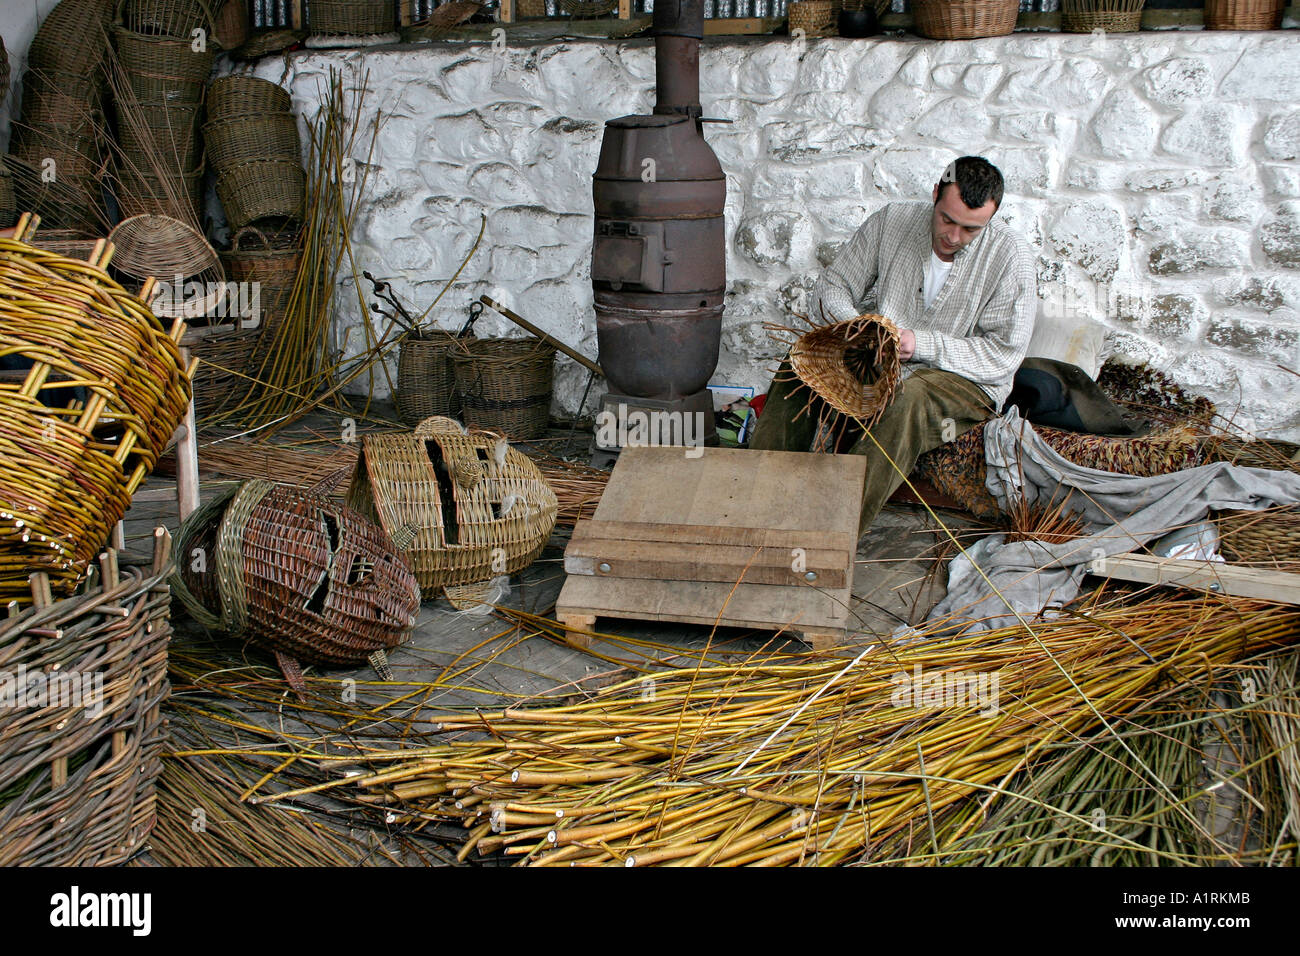 The Basket Weaver: A traditional basket weaver surounded by willow strips completed baskets and masks Stock Photo